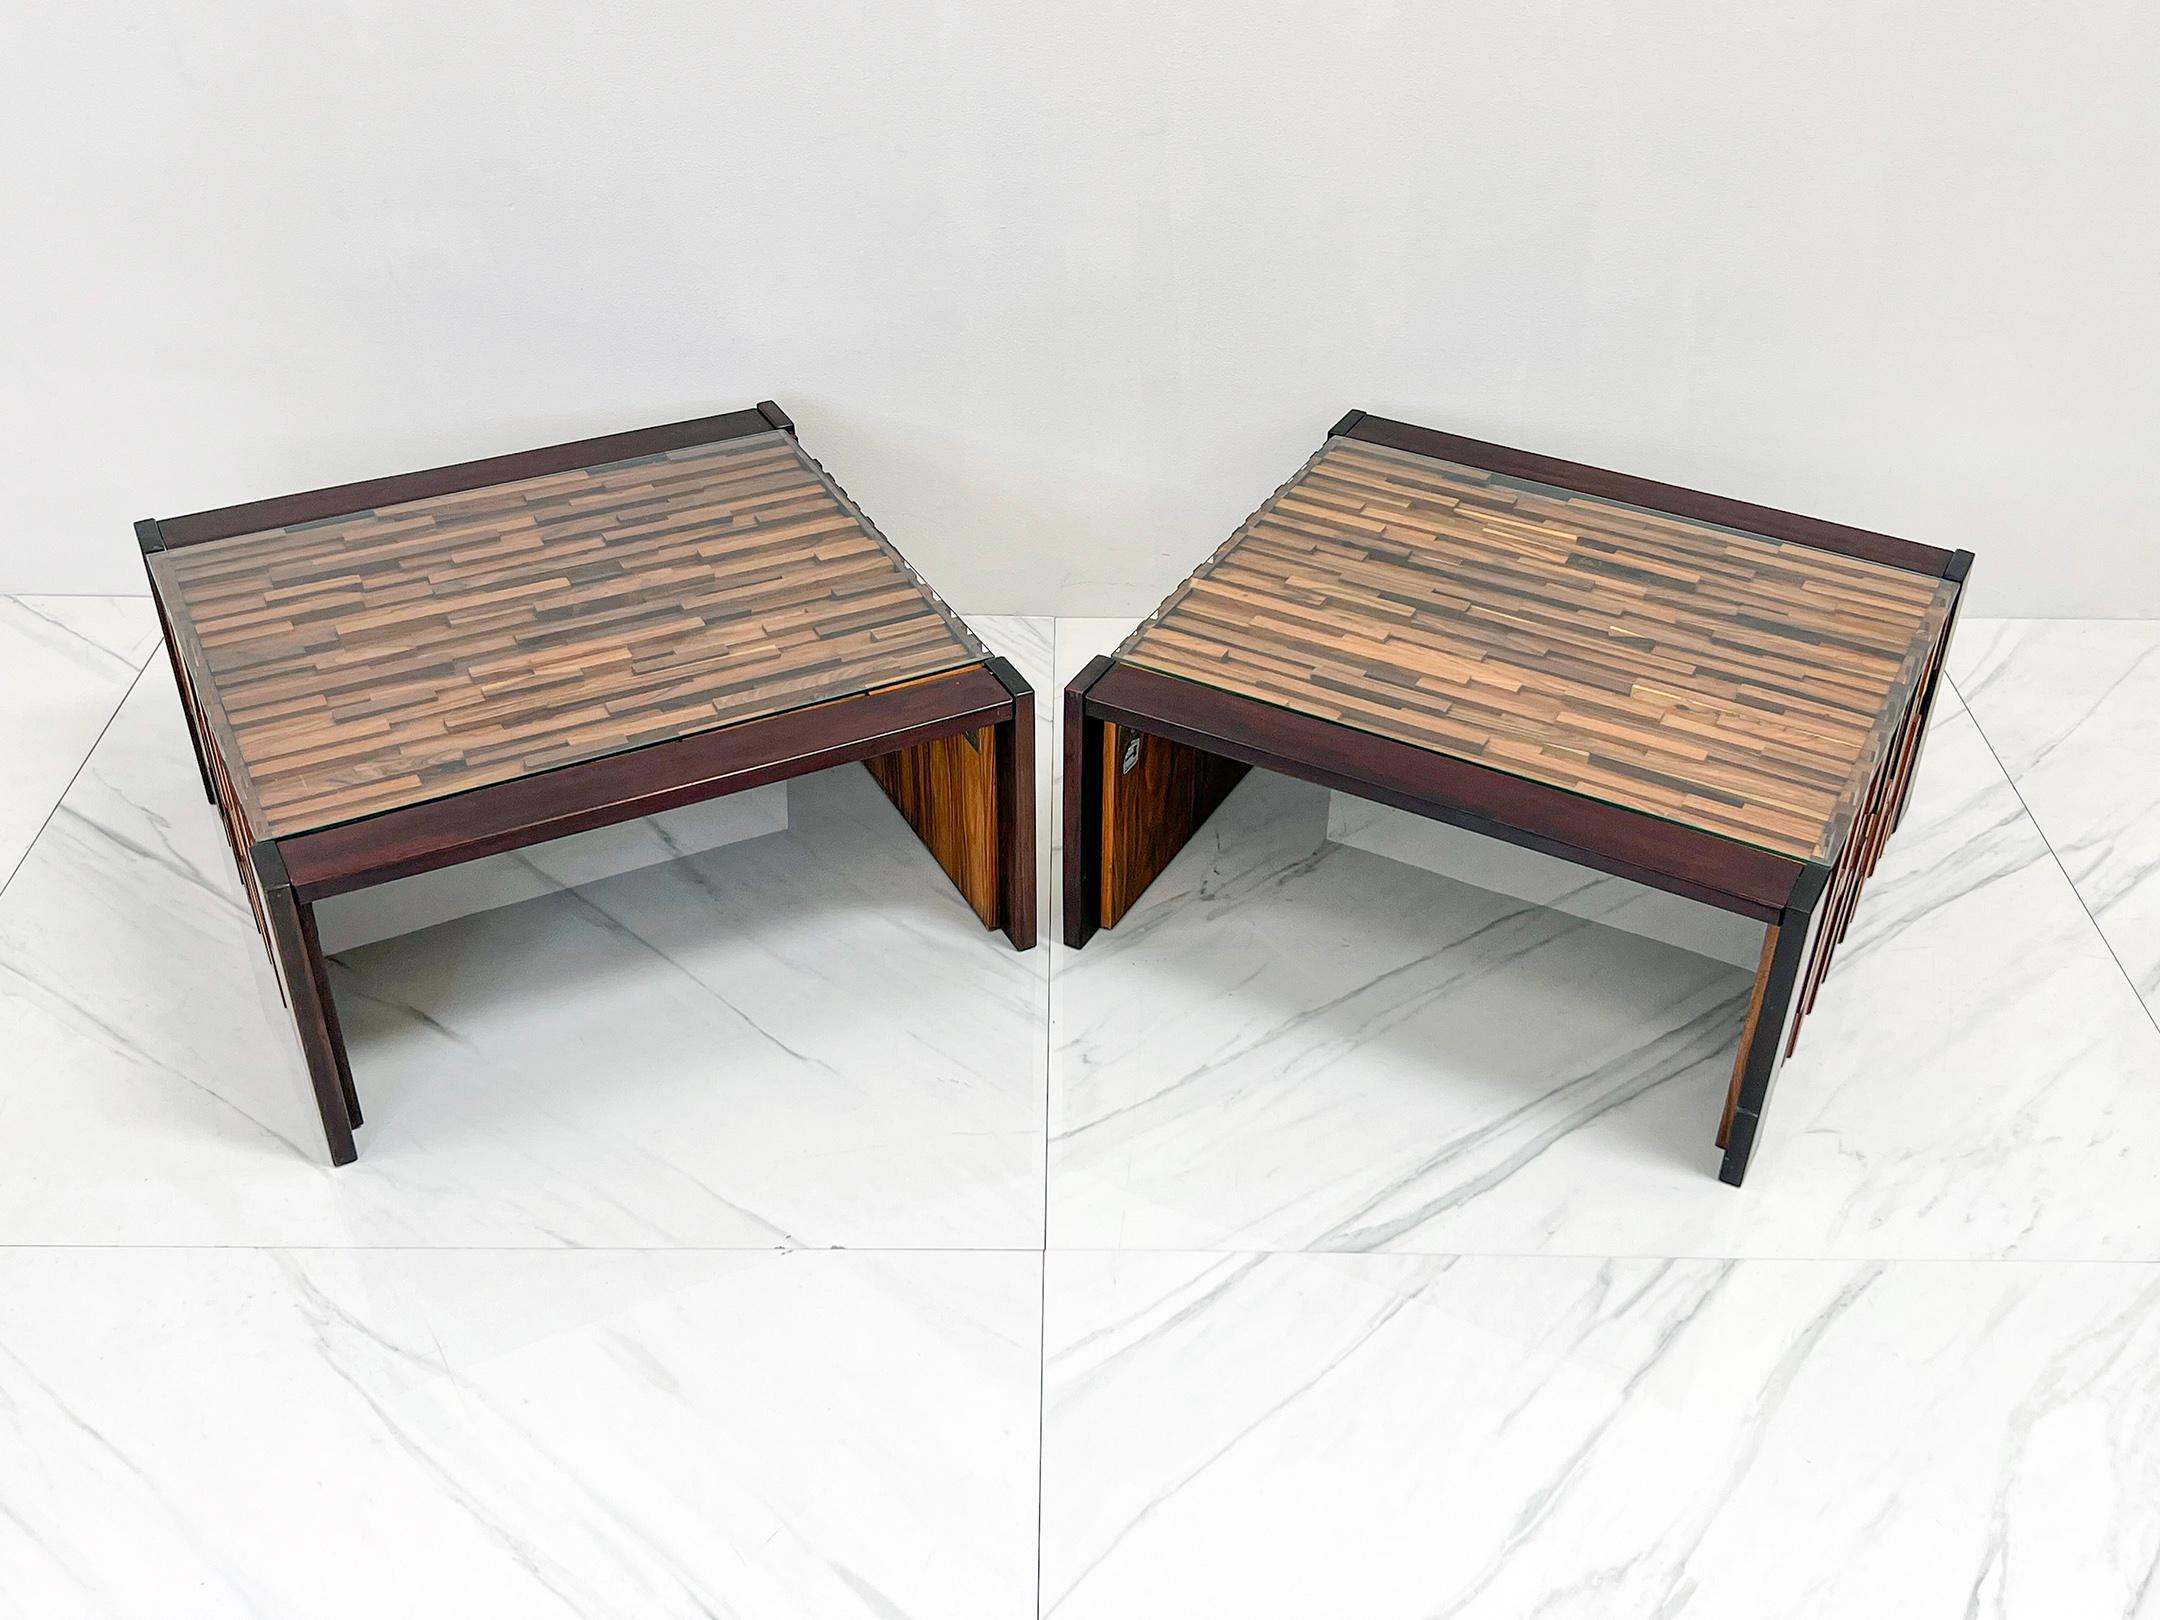 Brazilian Percival Lafer Folding Rosewood Cocktail Tables, a Pair, 1970s For Sale